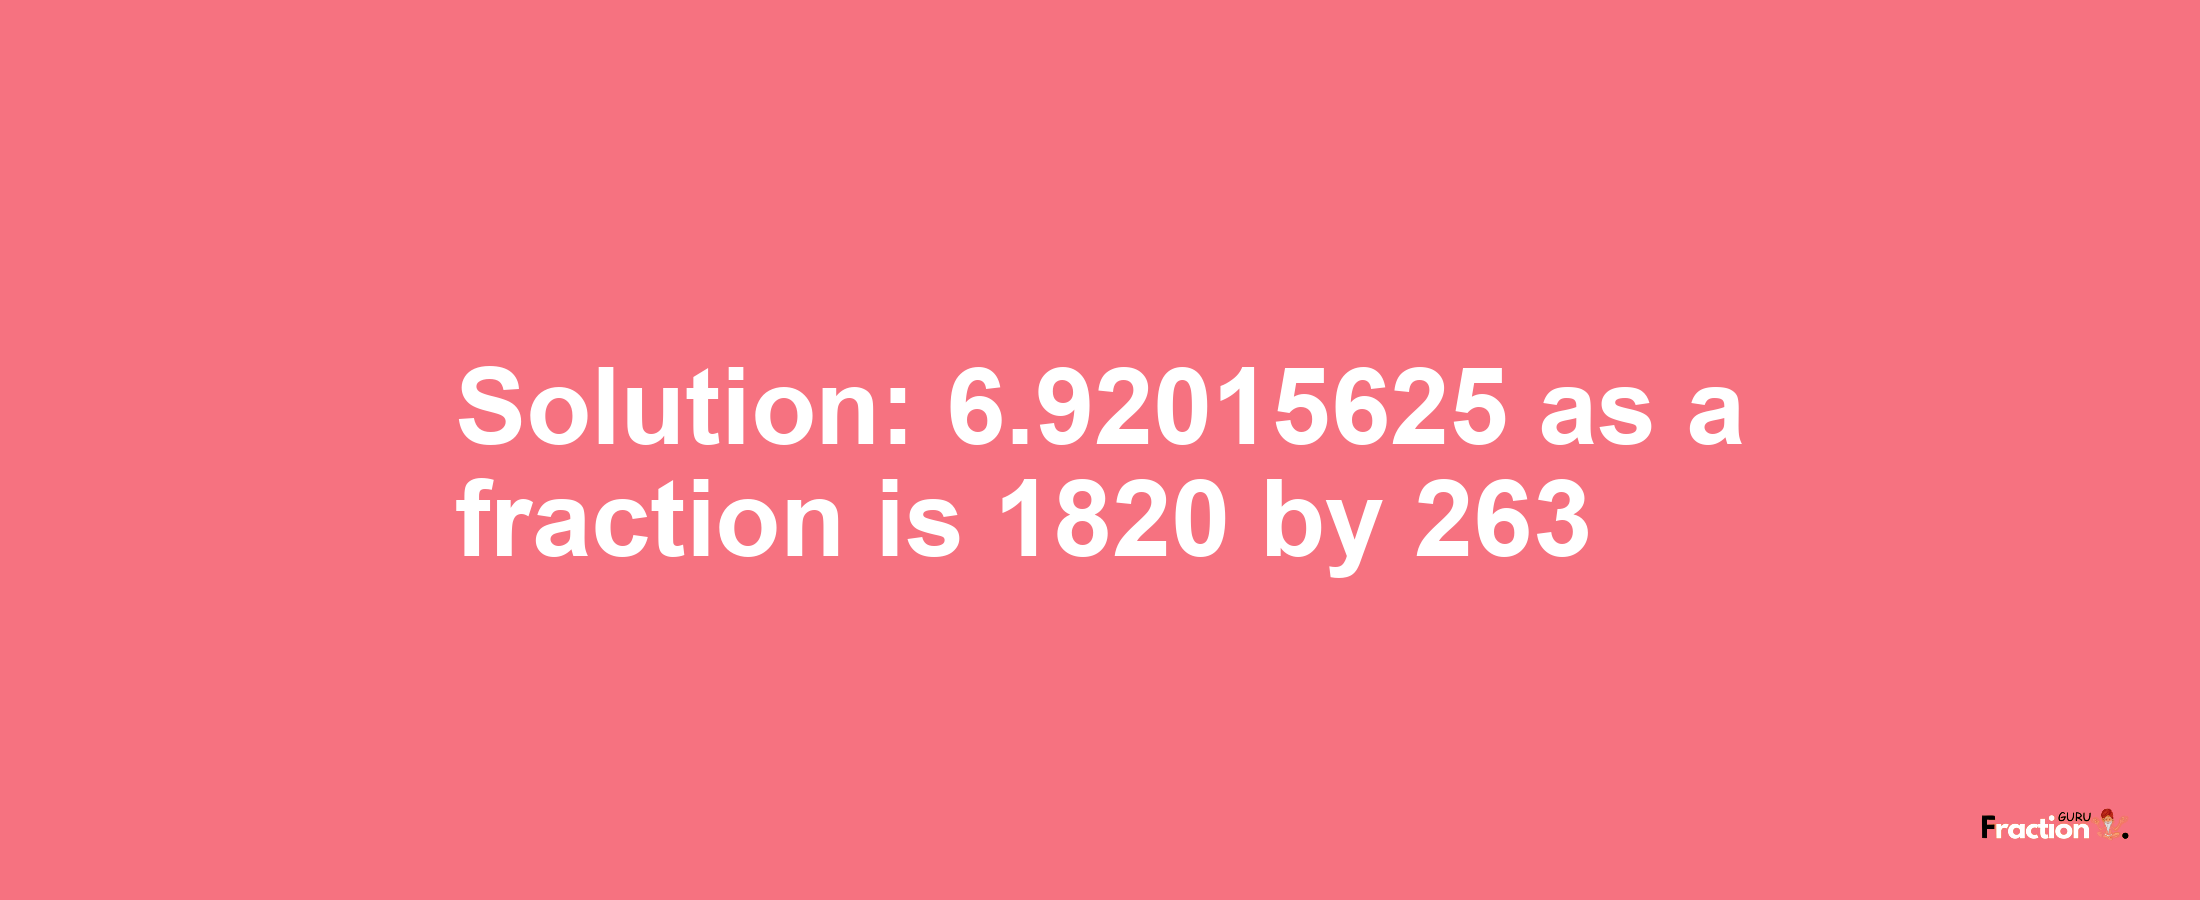 Solution:6.92015625 as a fraction is 1820/263